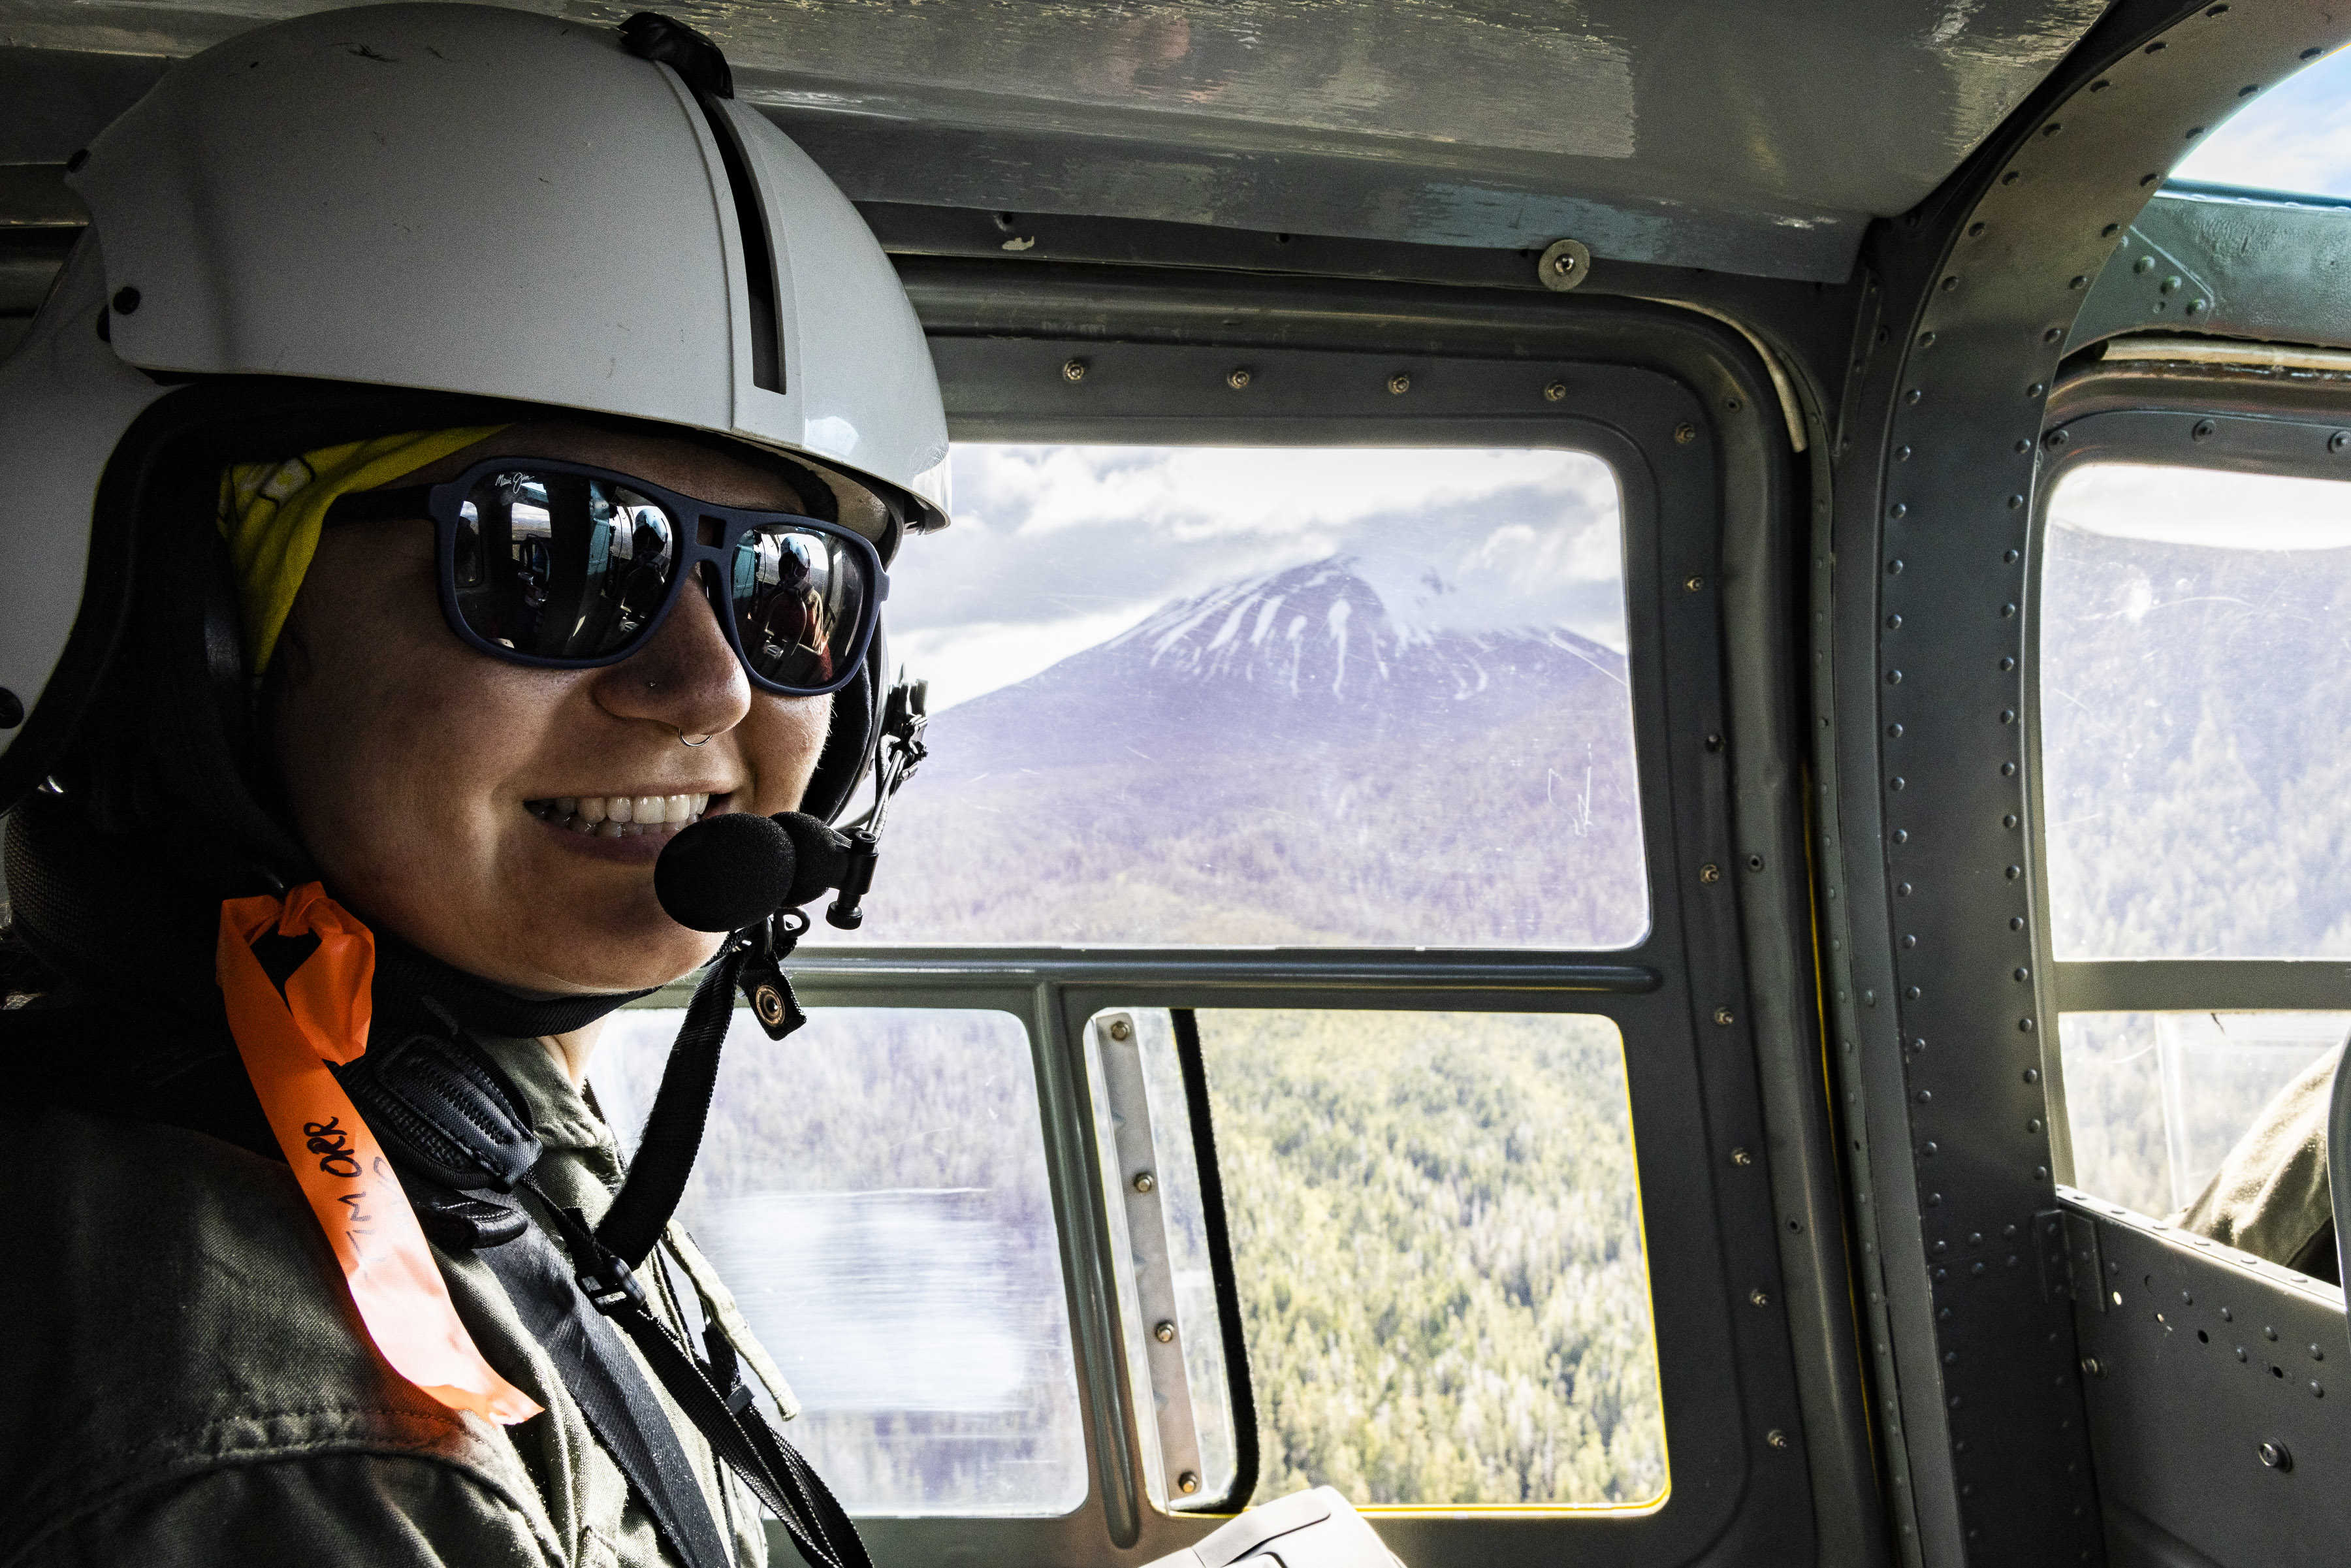 Photo shot from within a small airplane of a woman in a helmet with a headset microphone. Through the window is a mountain with steam rising from the top.